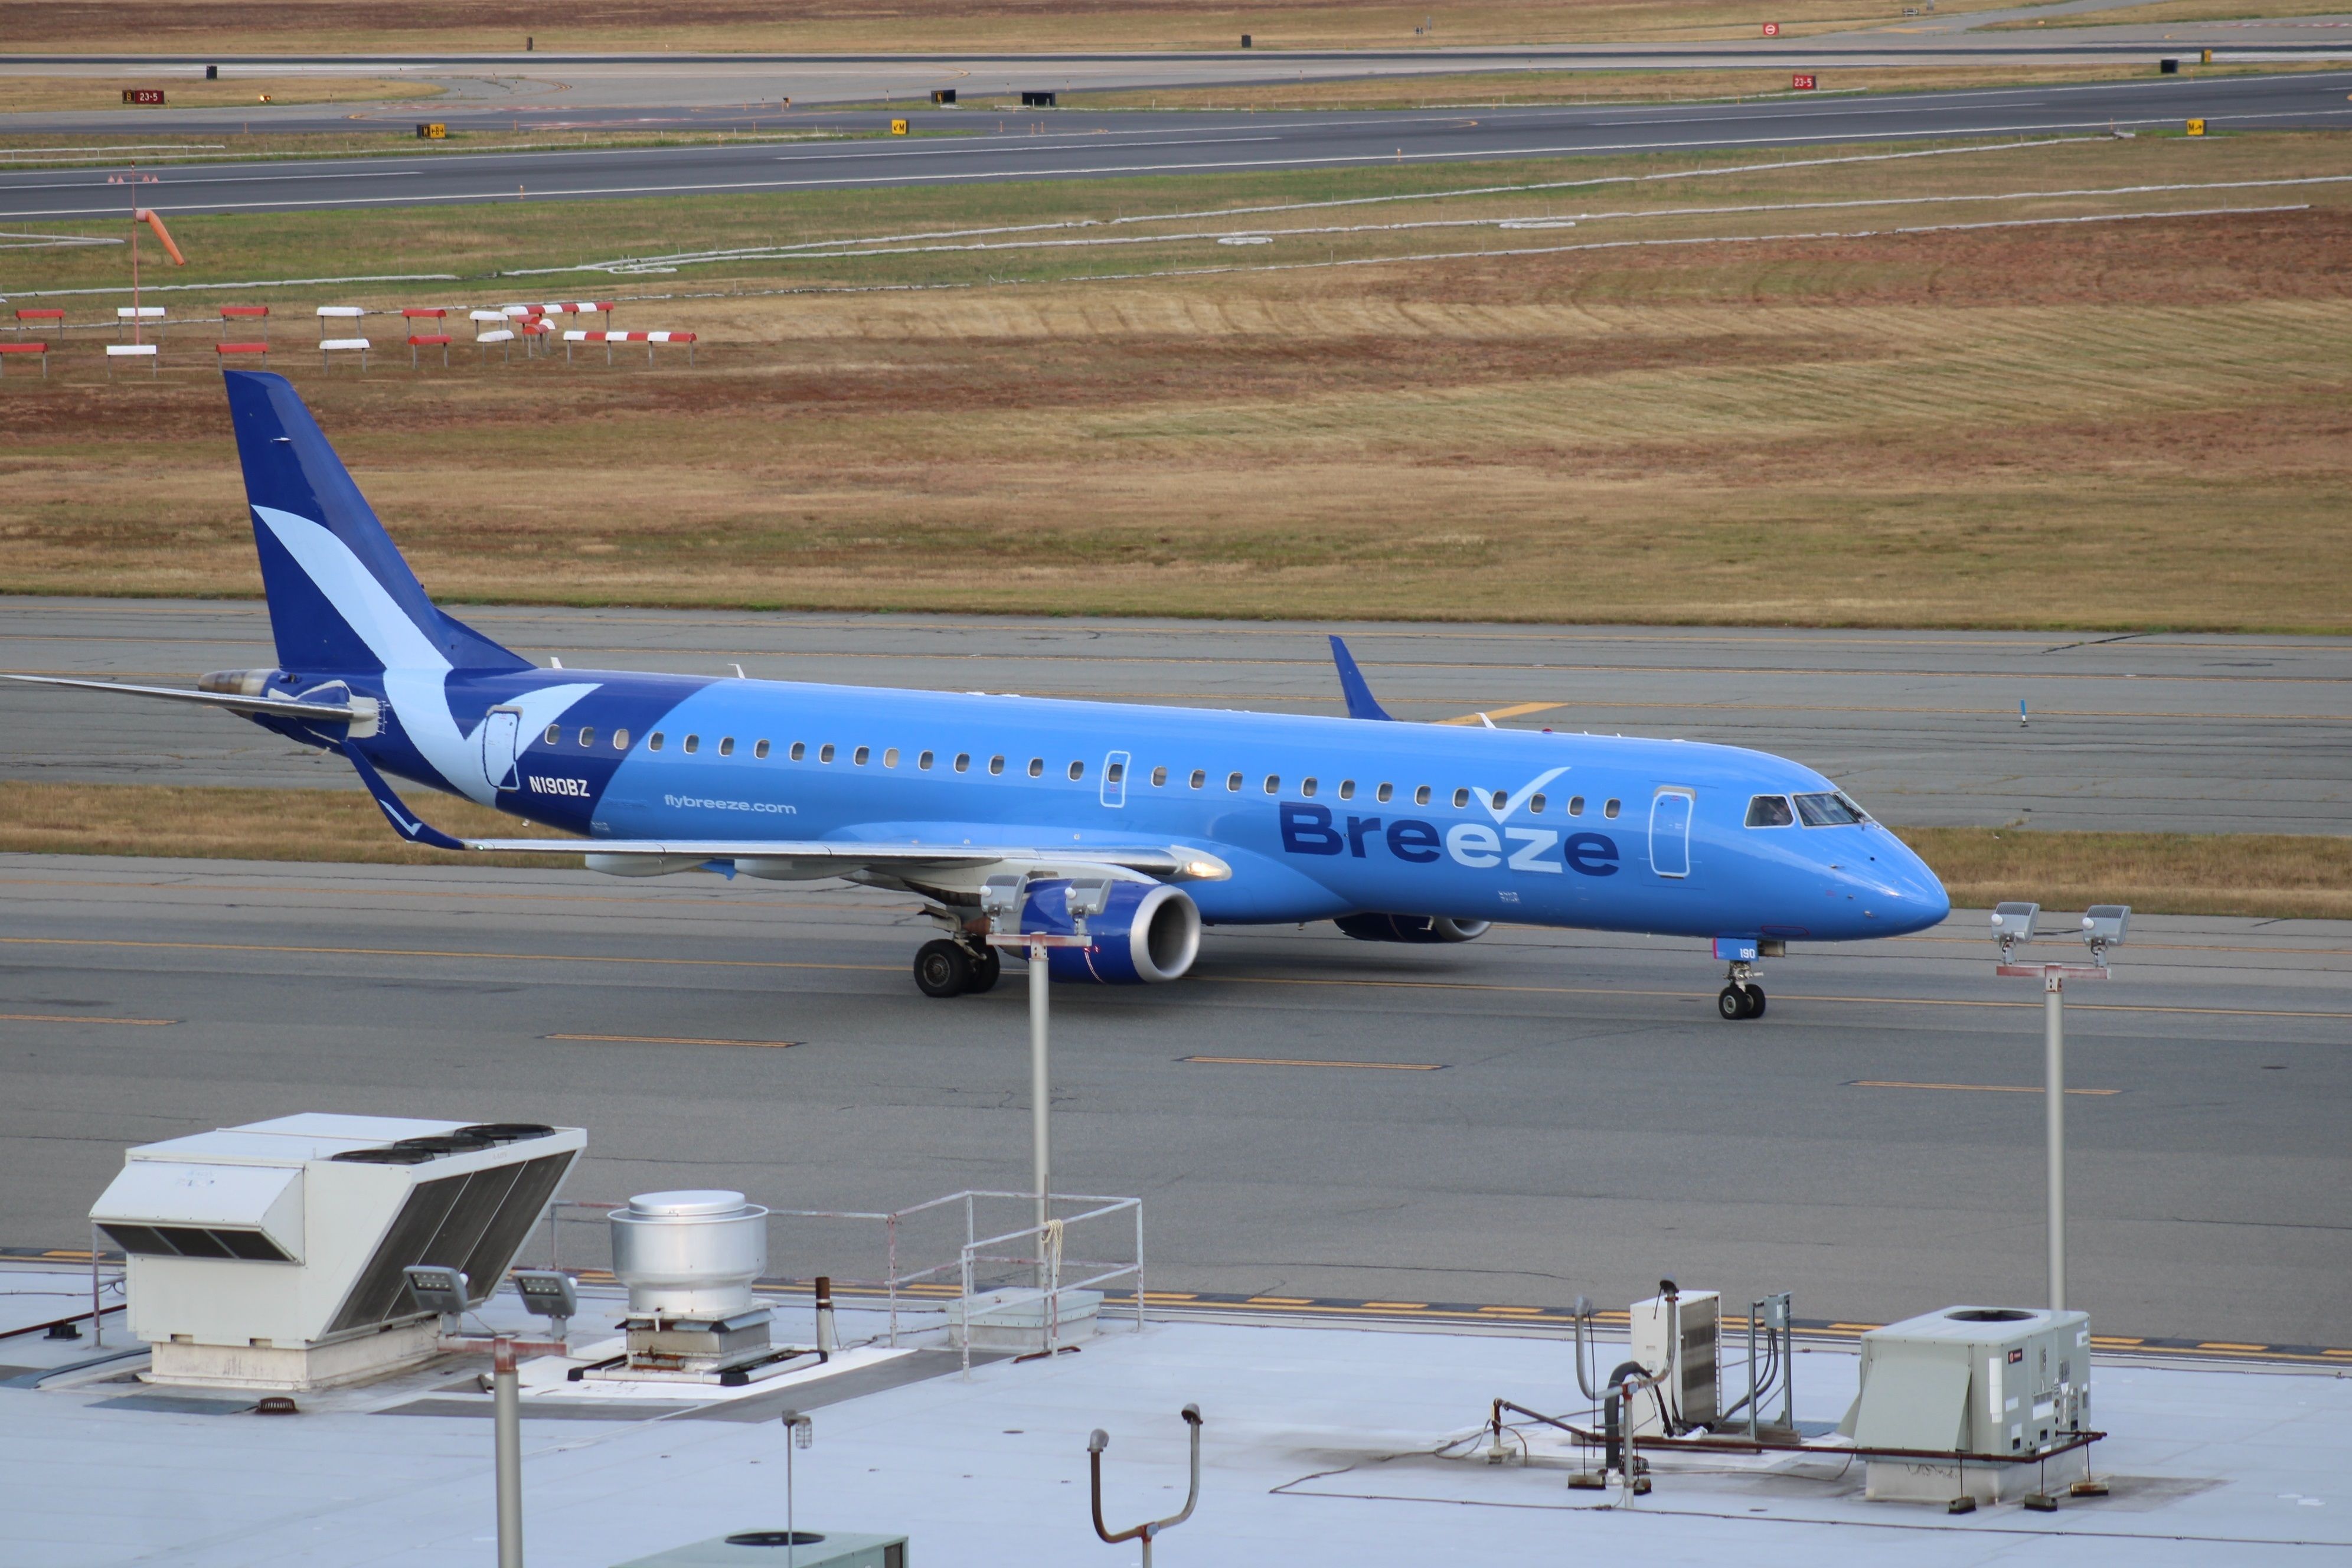 A Breeze Airways Embraer aircraft taxiing to the gate.